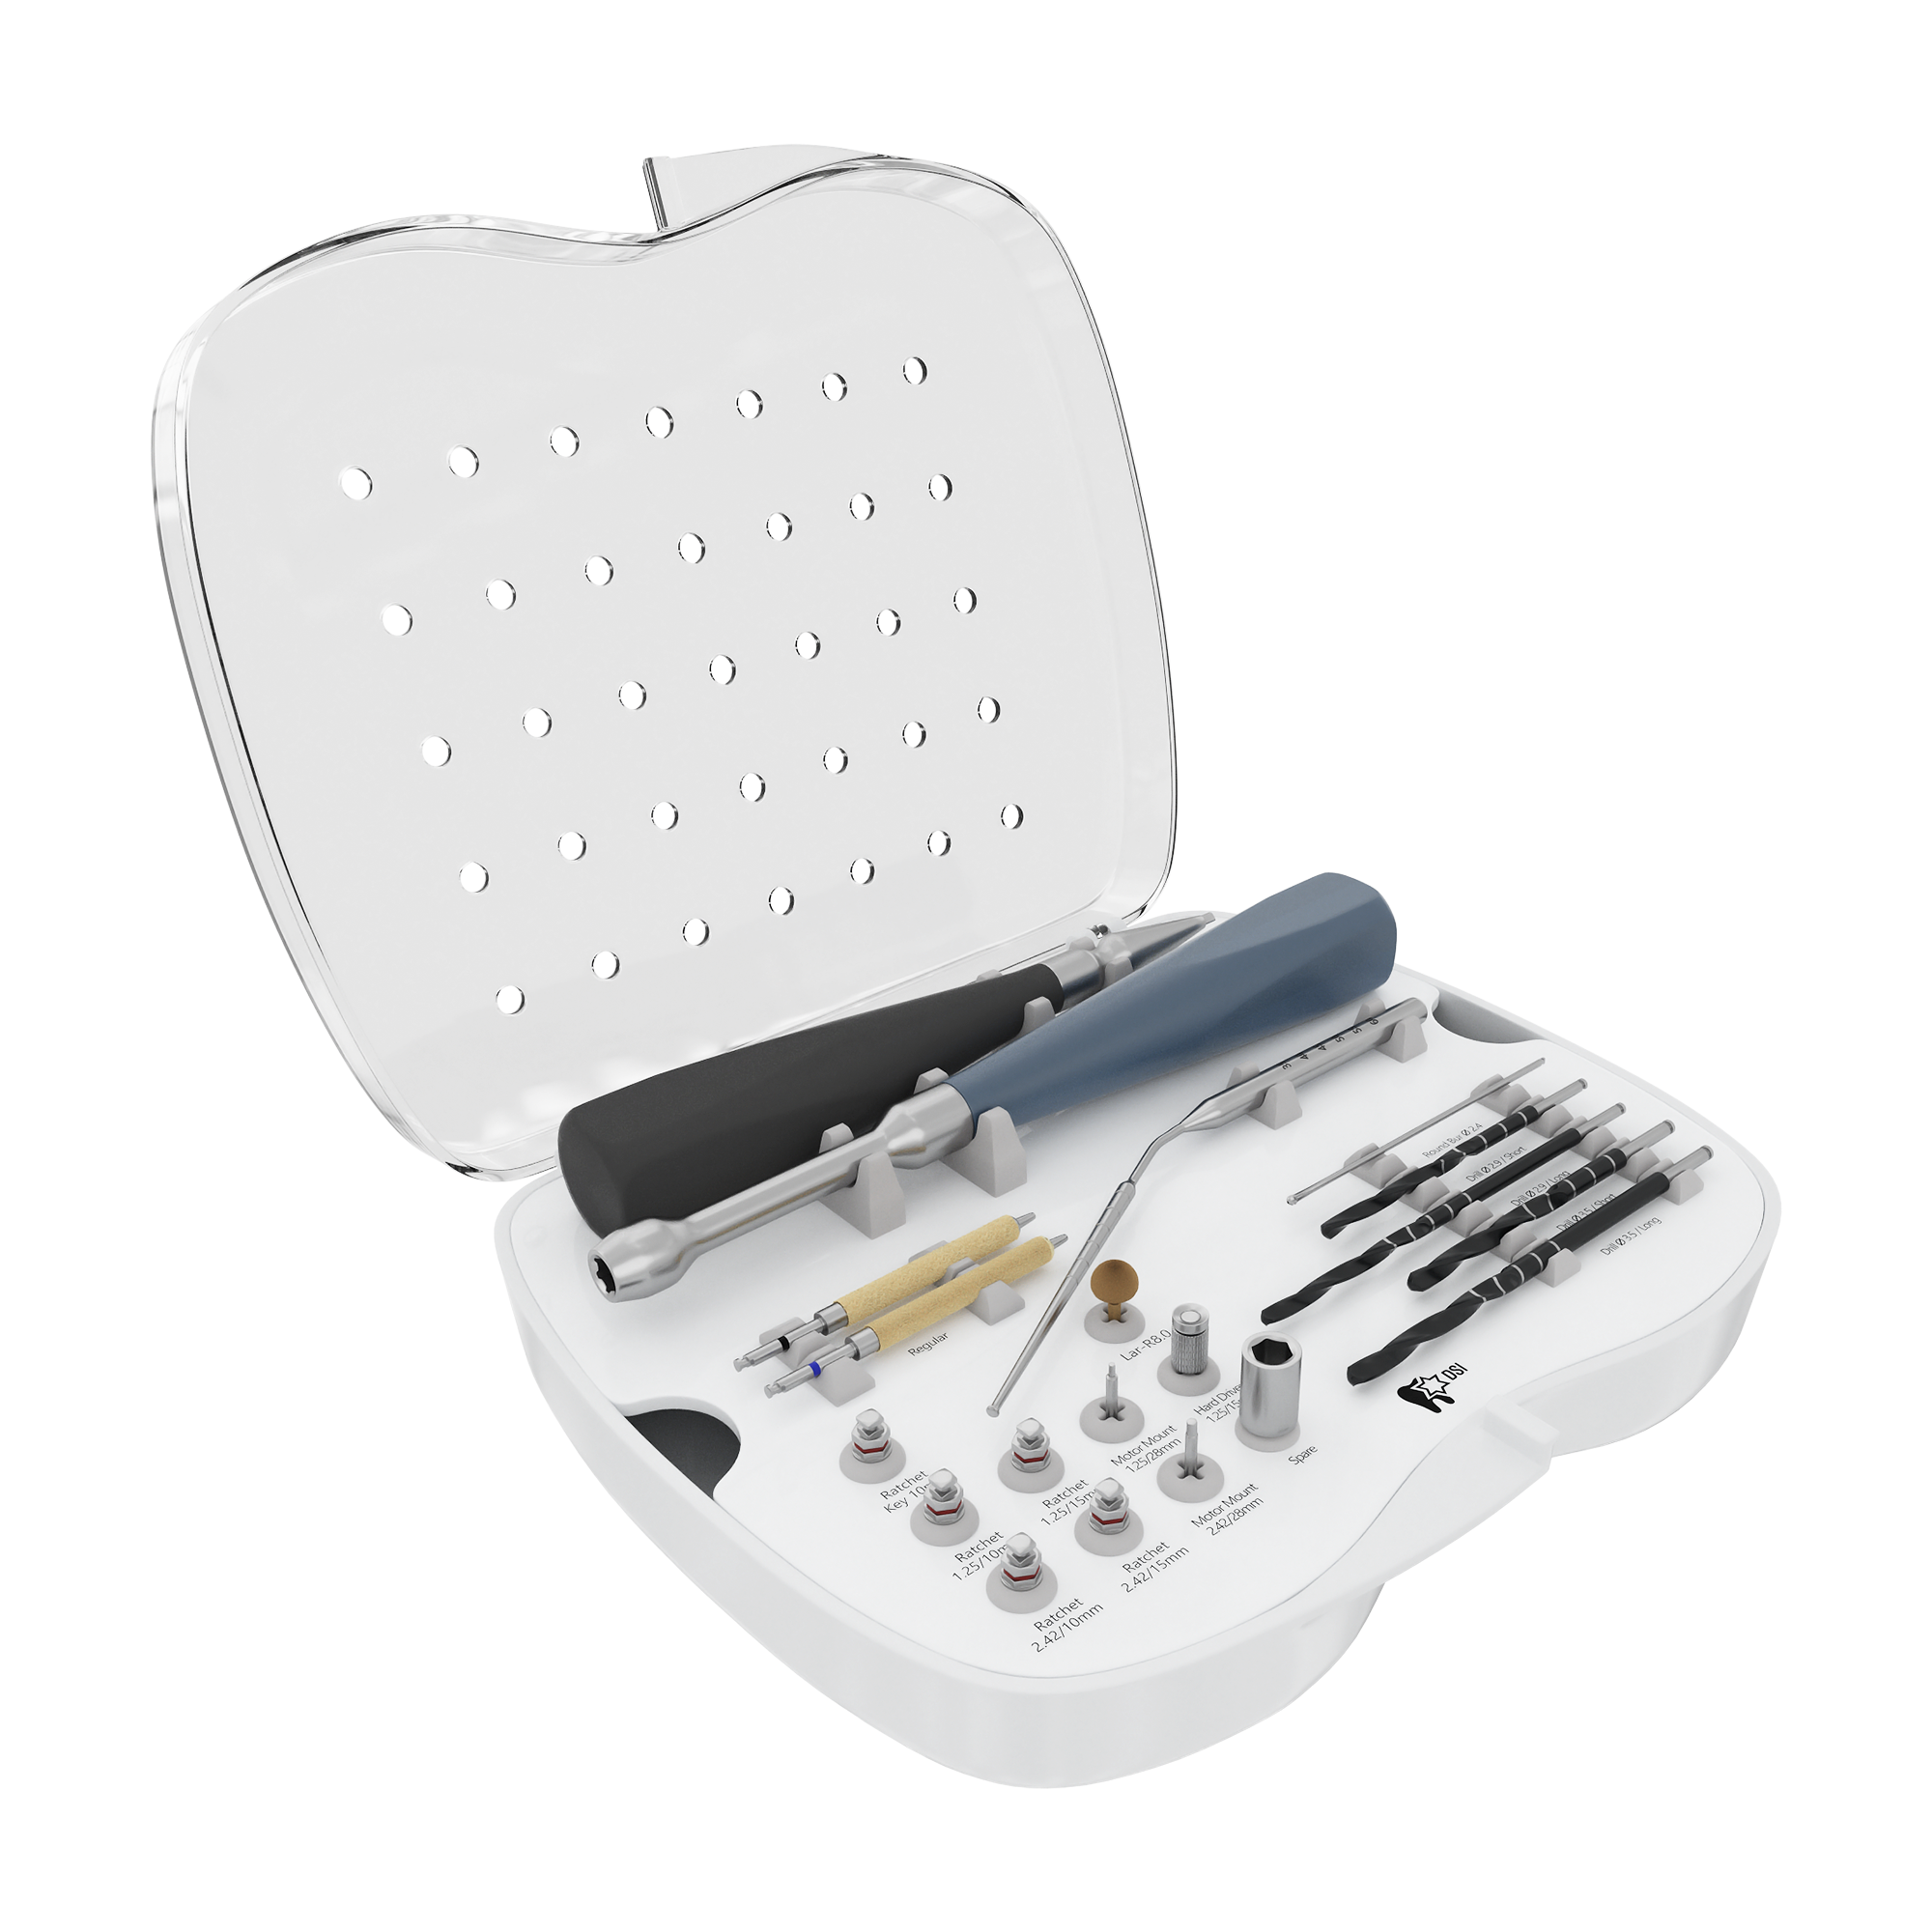 DSI SK007 Zygo Surgical Kit Tools and Drills Zygomatic Implant Installation